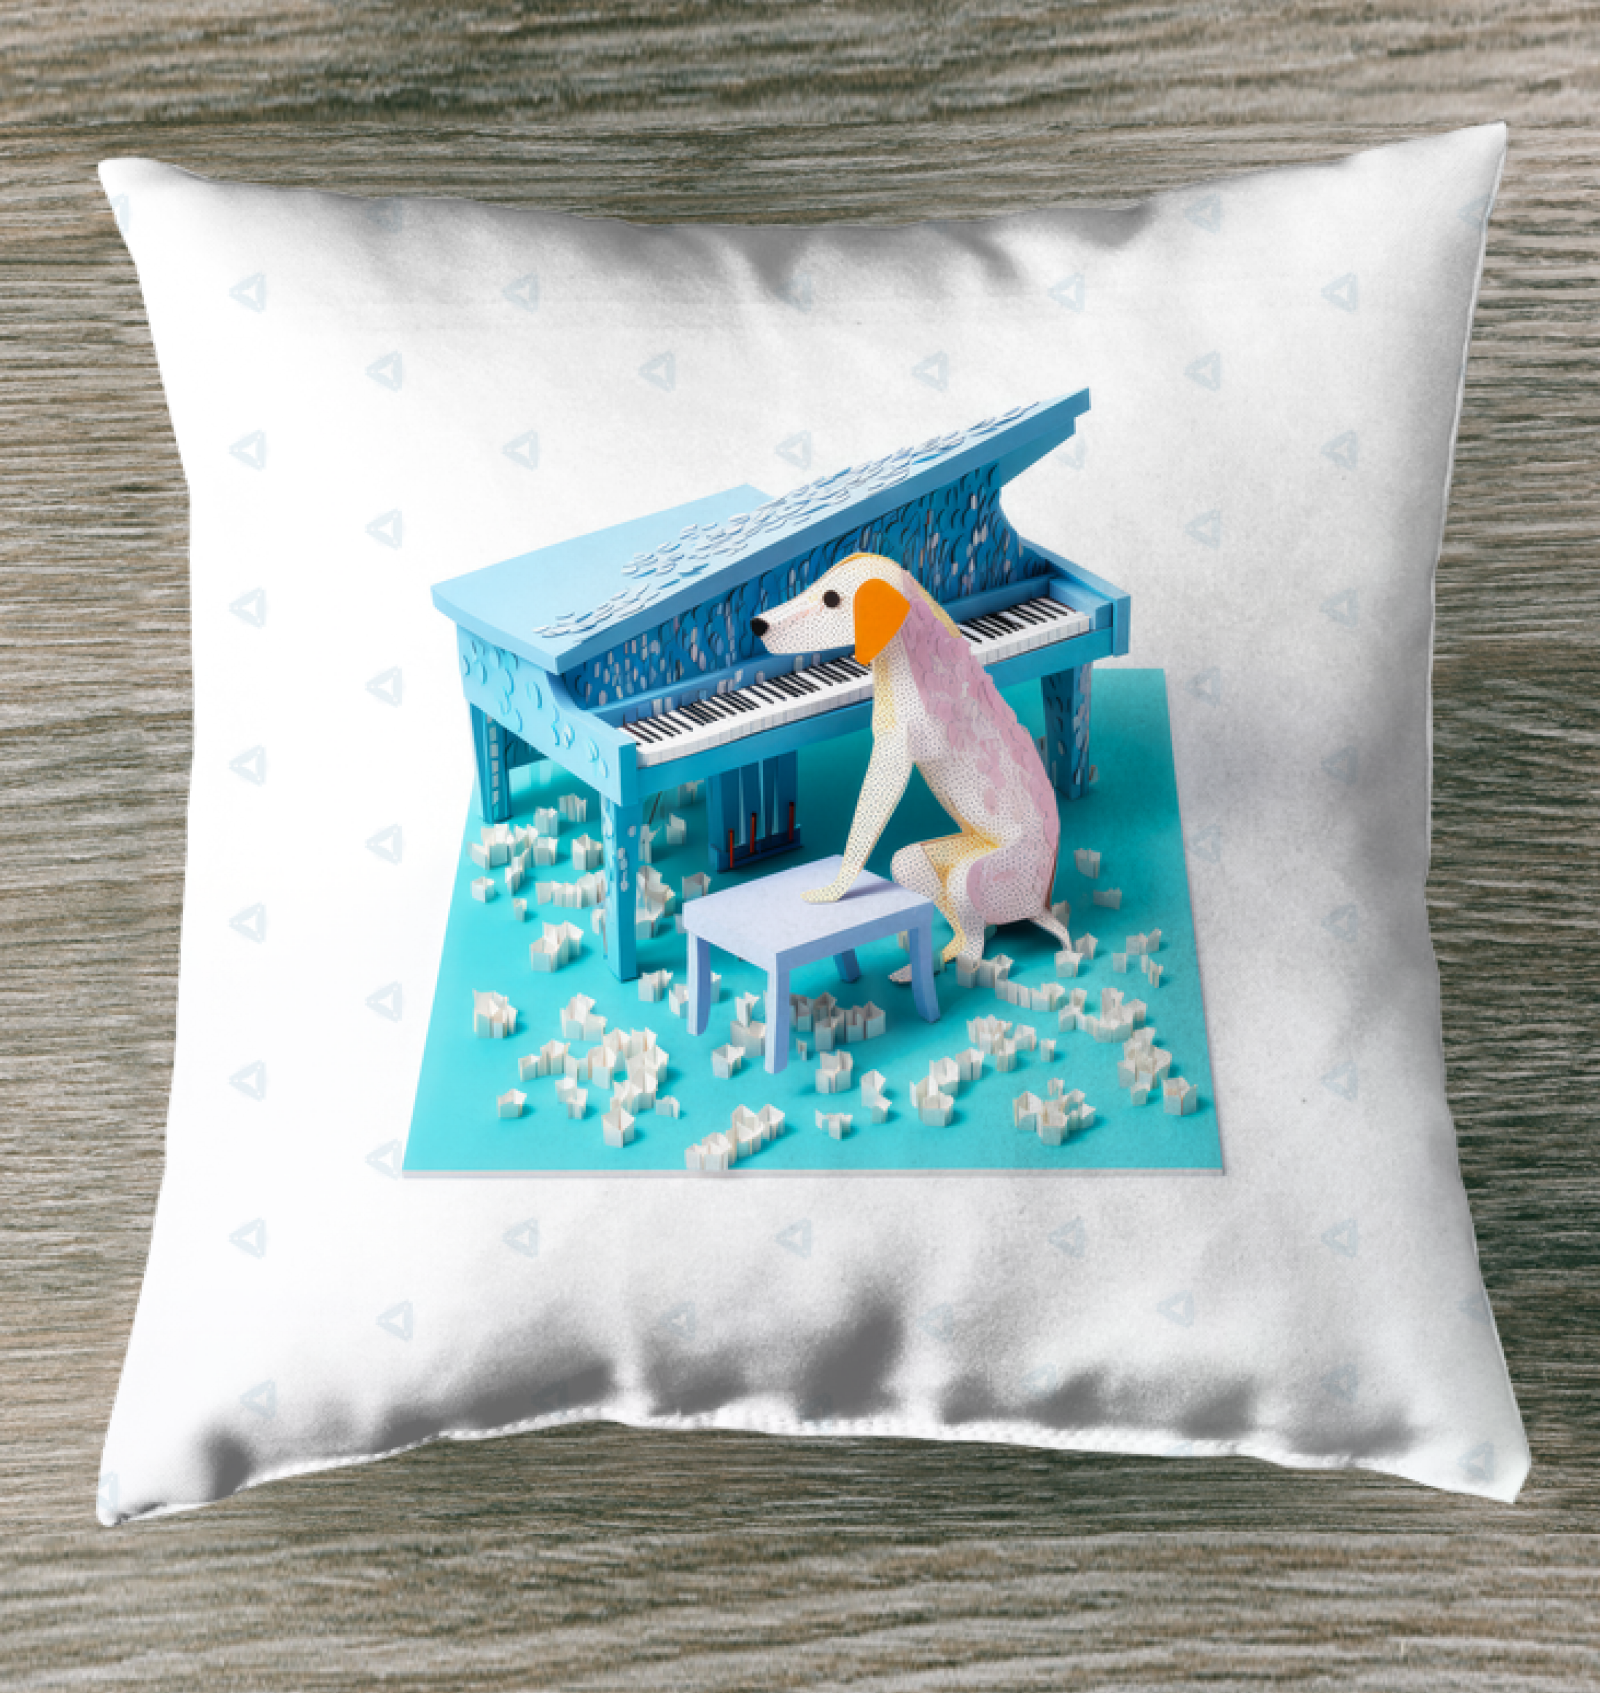 Outdoor pillow with frosty snowflake mosaic design.